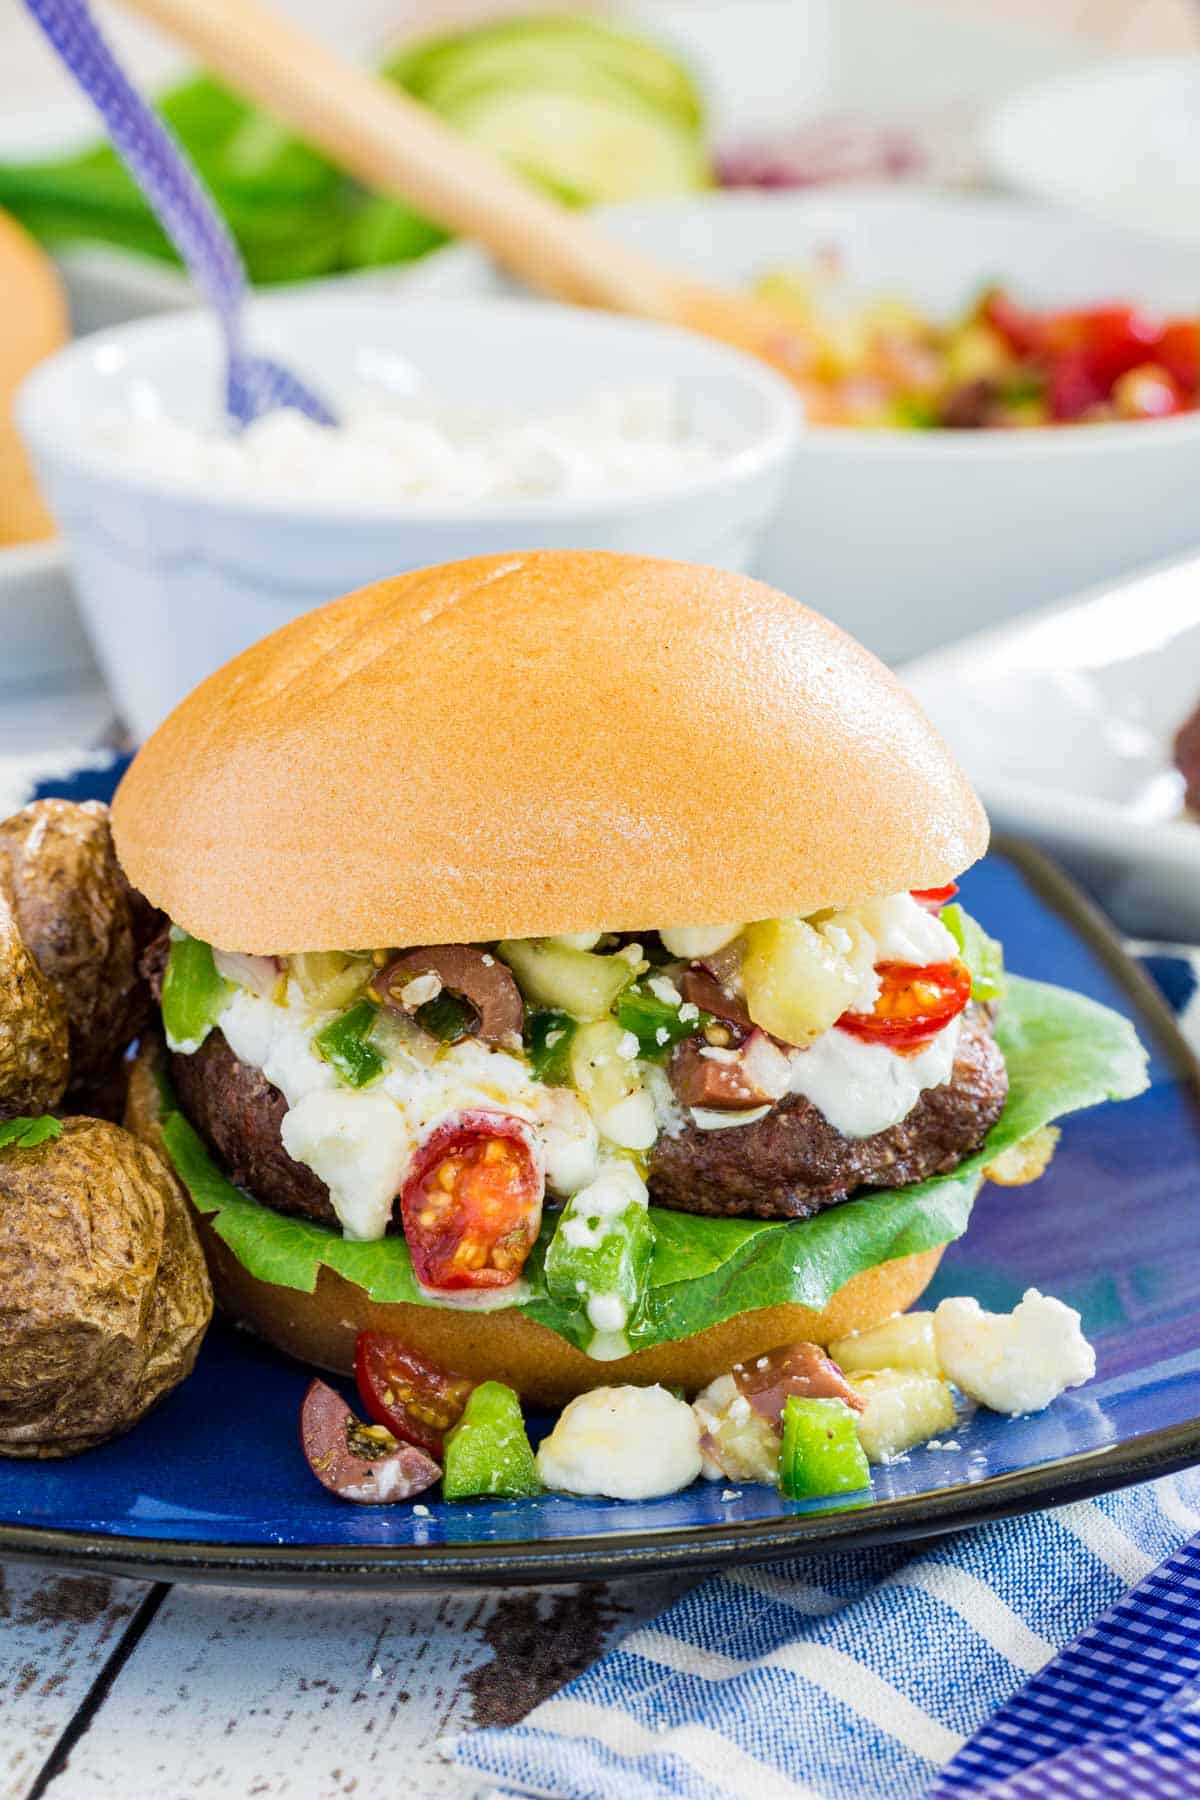 A Greek burger with tzatziki sauce and Greek salad topping dripping off of it onto a blue plate.